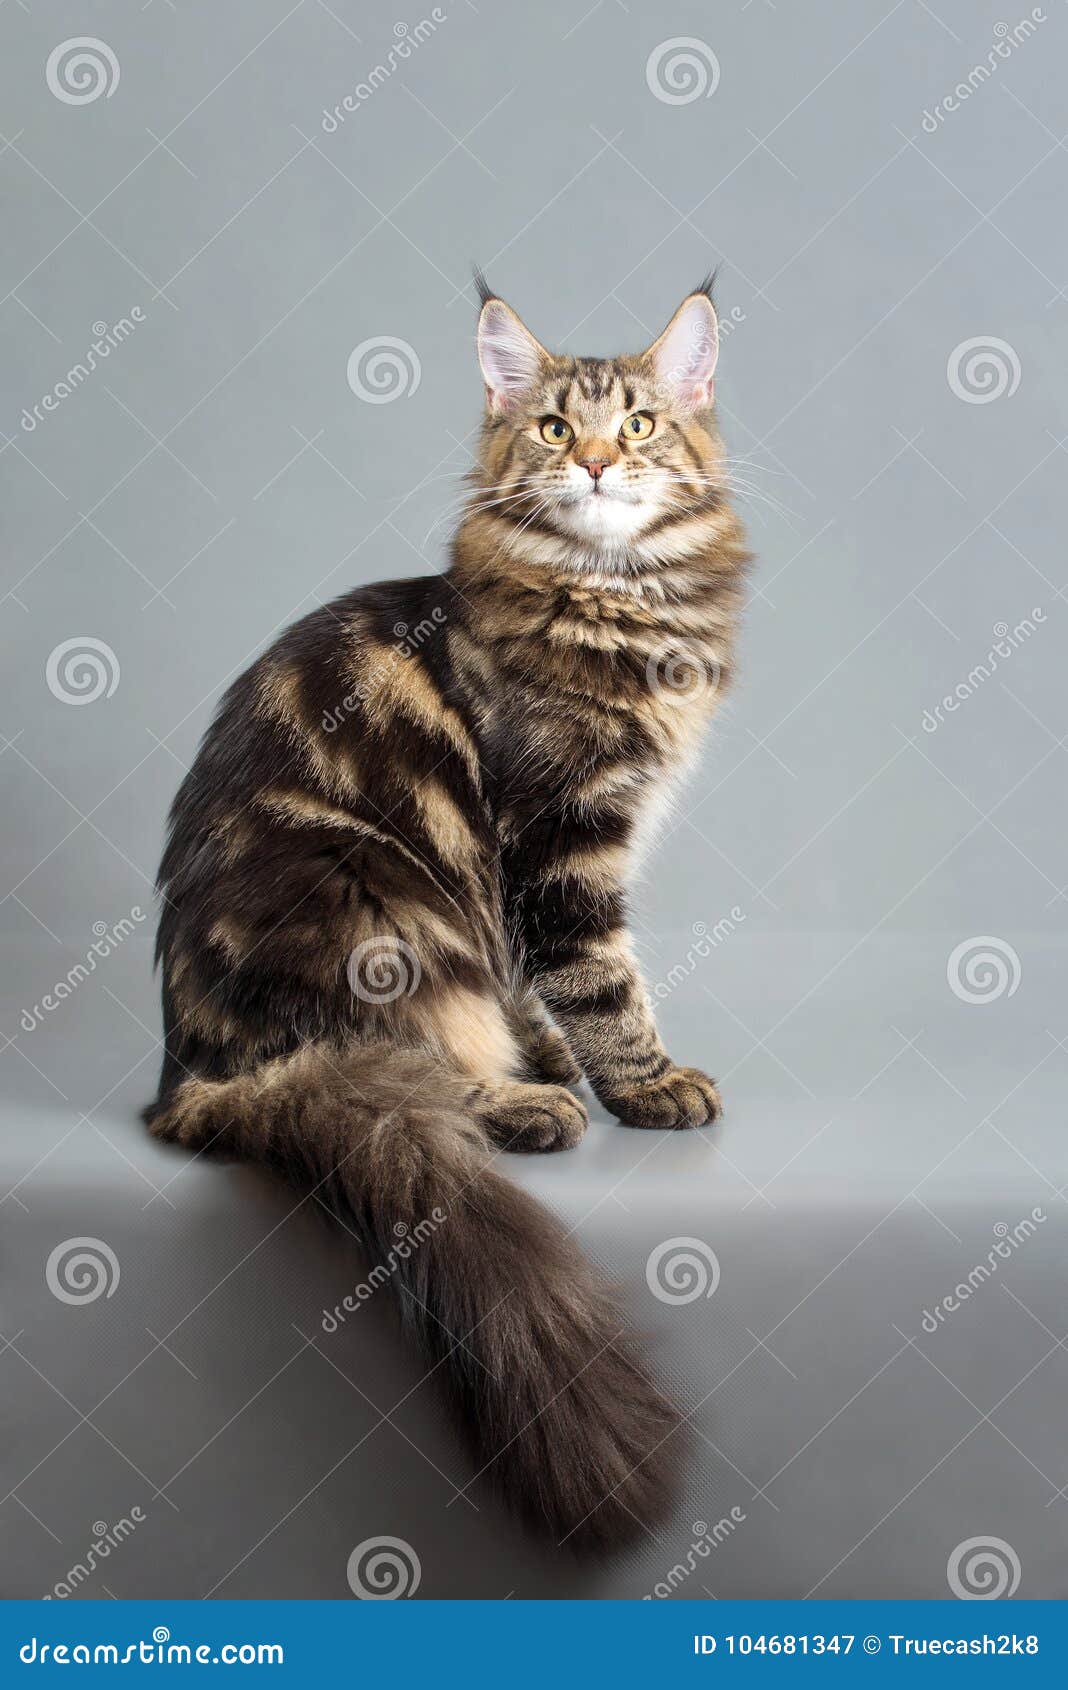 Maine Coon Kitten Black Marble Color 6 Months Old Studio